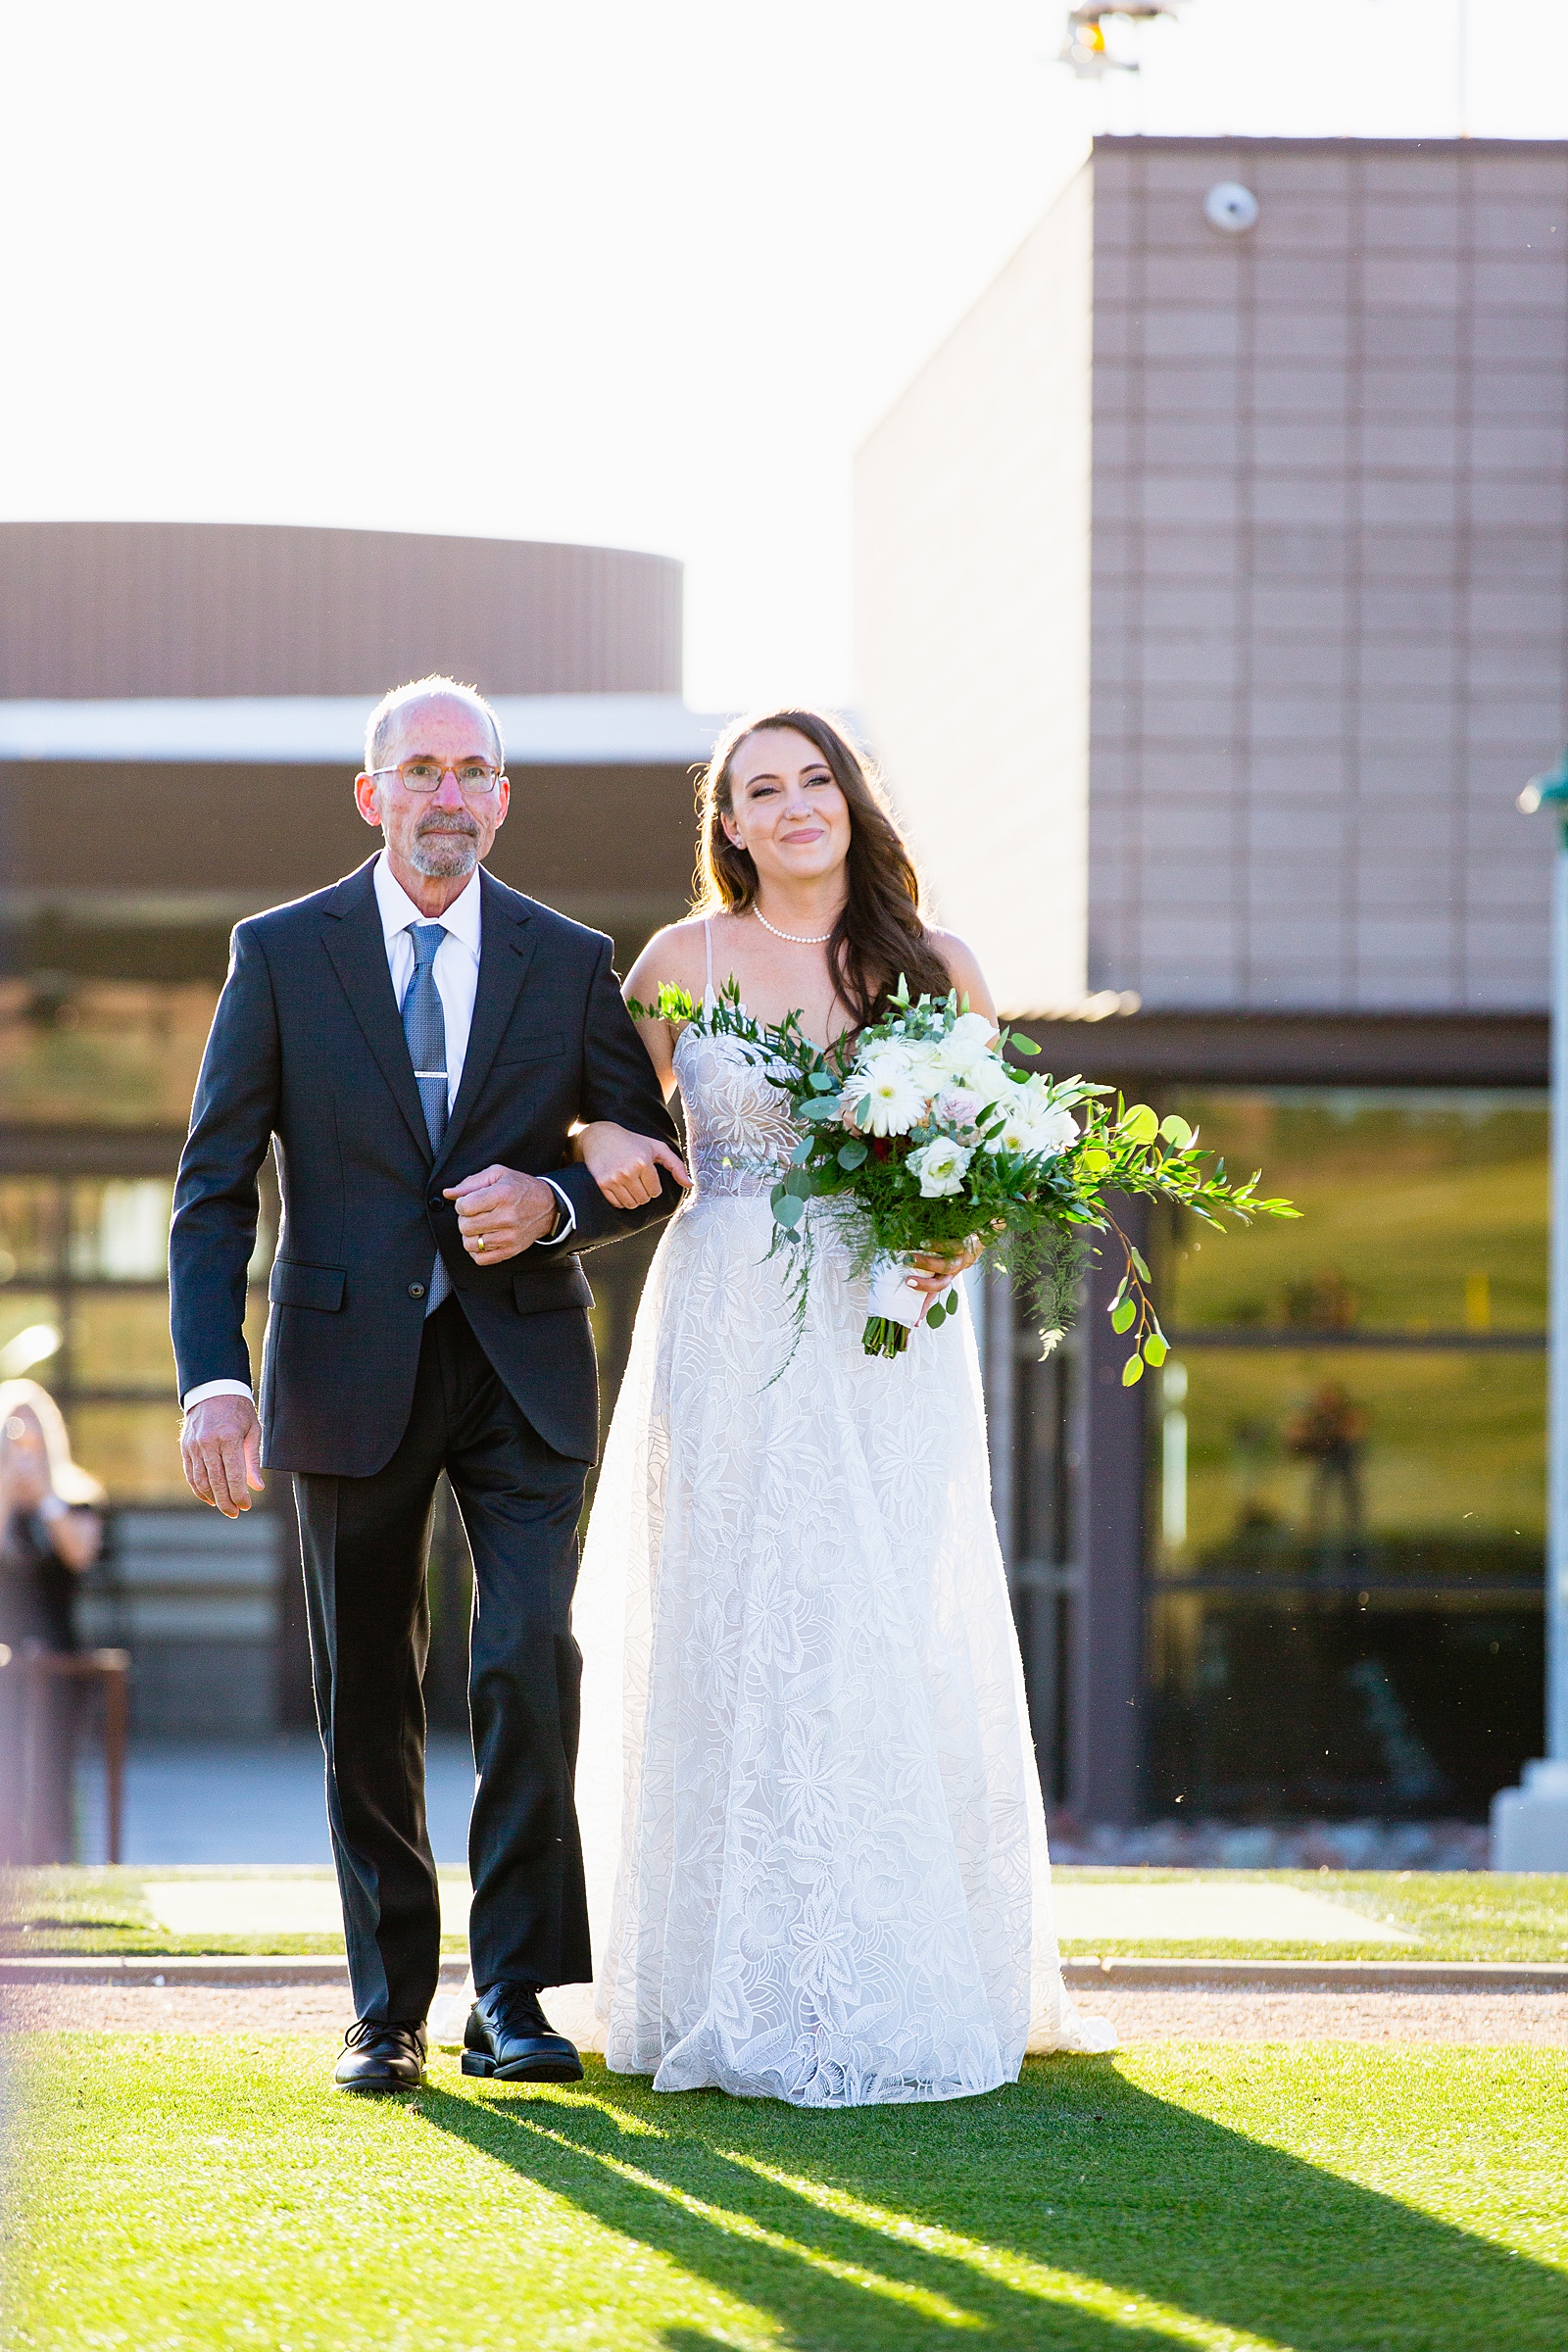 Bride walking down aisle during Papago Events wedding ceremony by Phoenix wedding photographer PMA Photography.